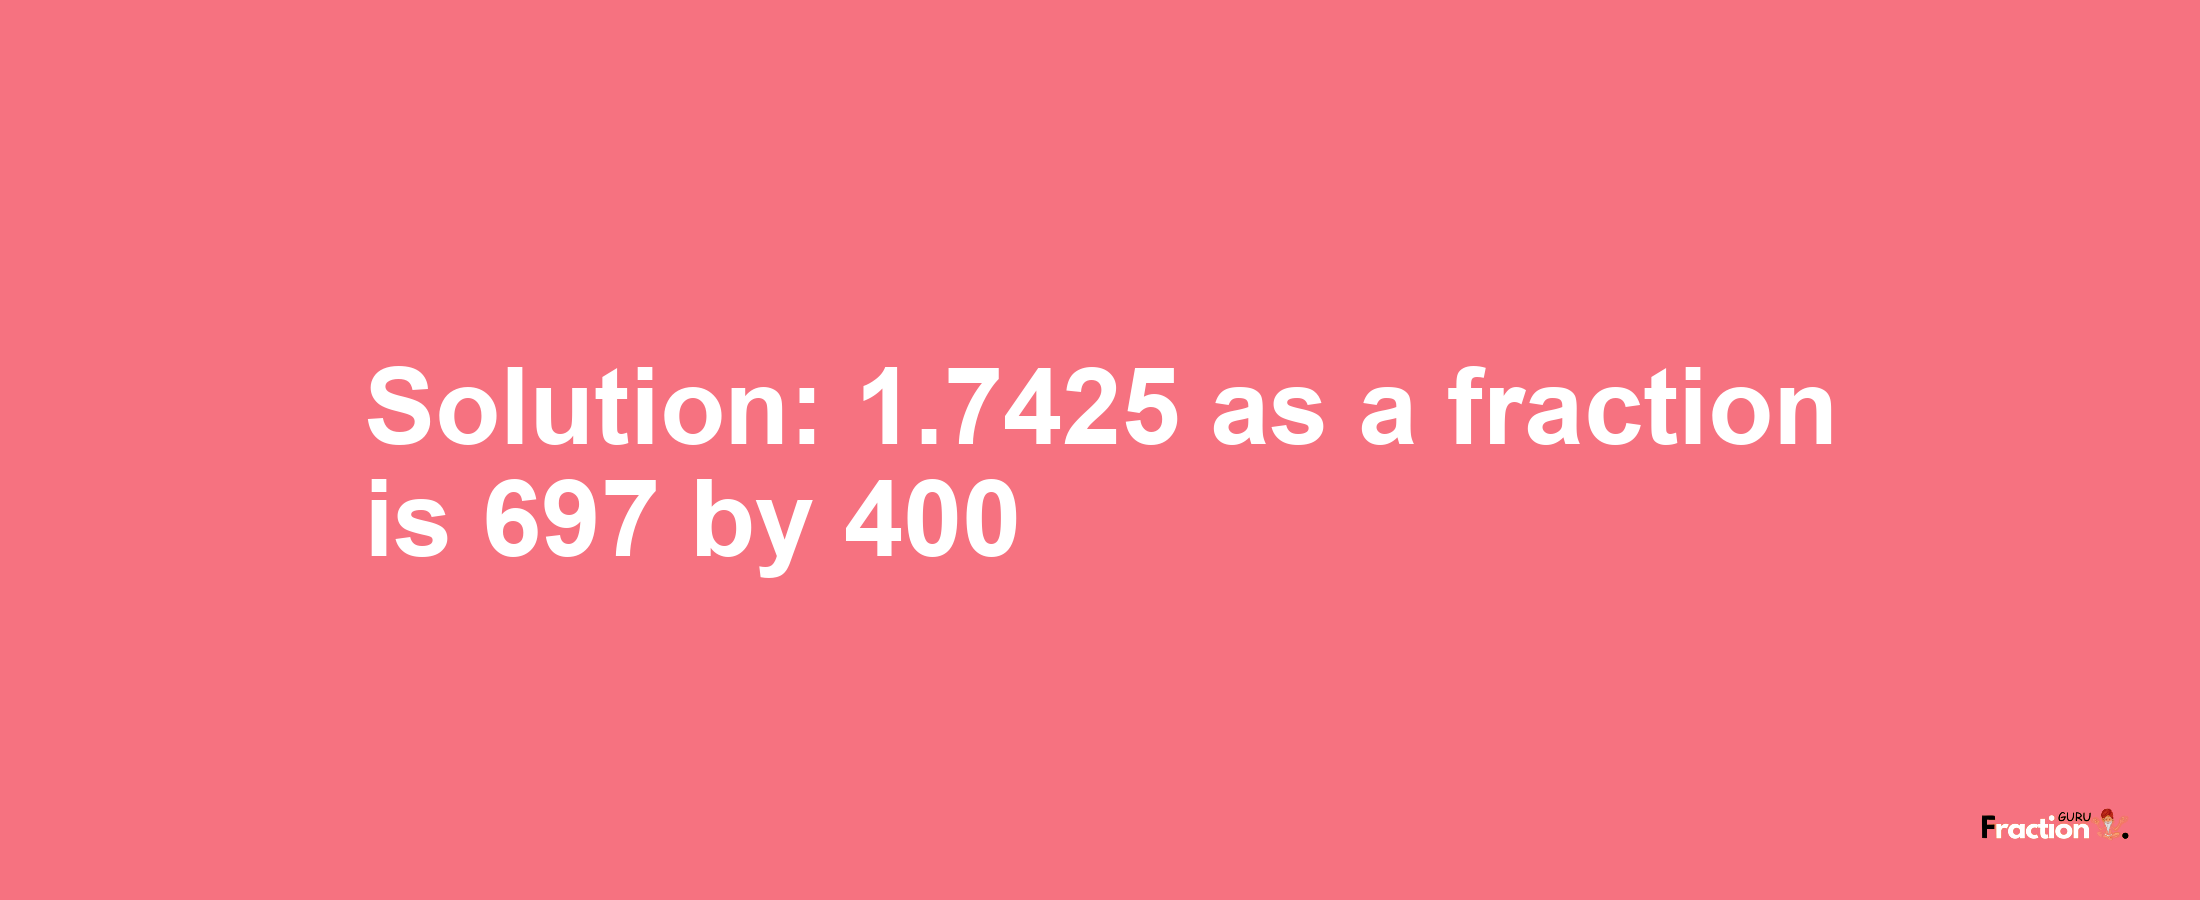 Solution:1.7425 as a fraction is 697/400